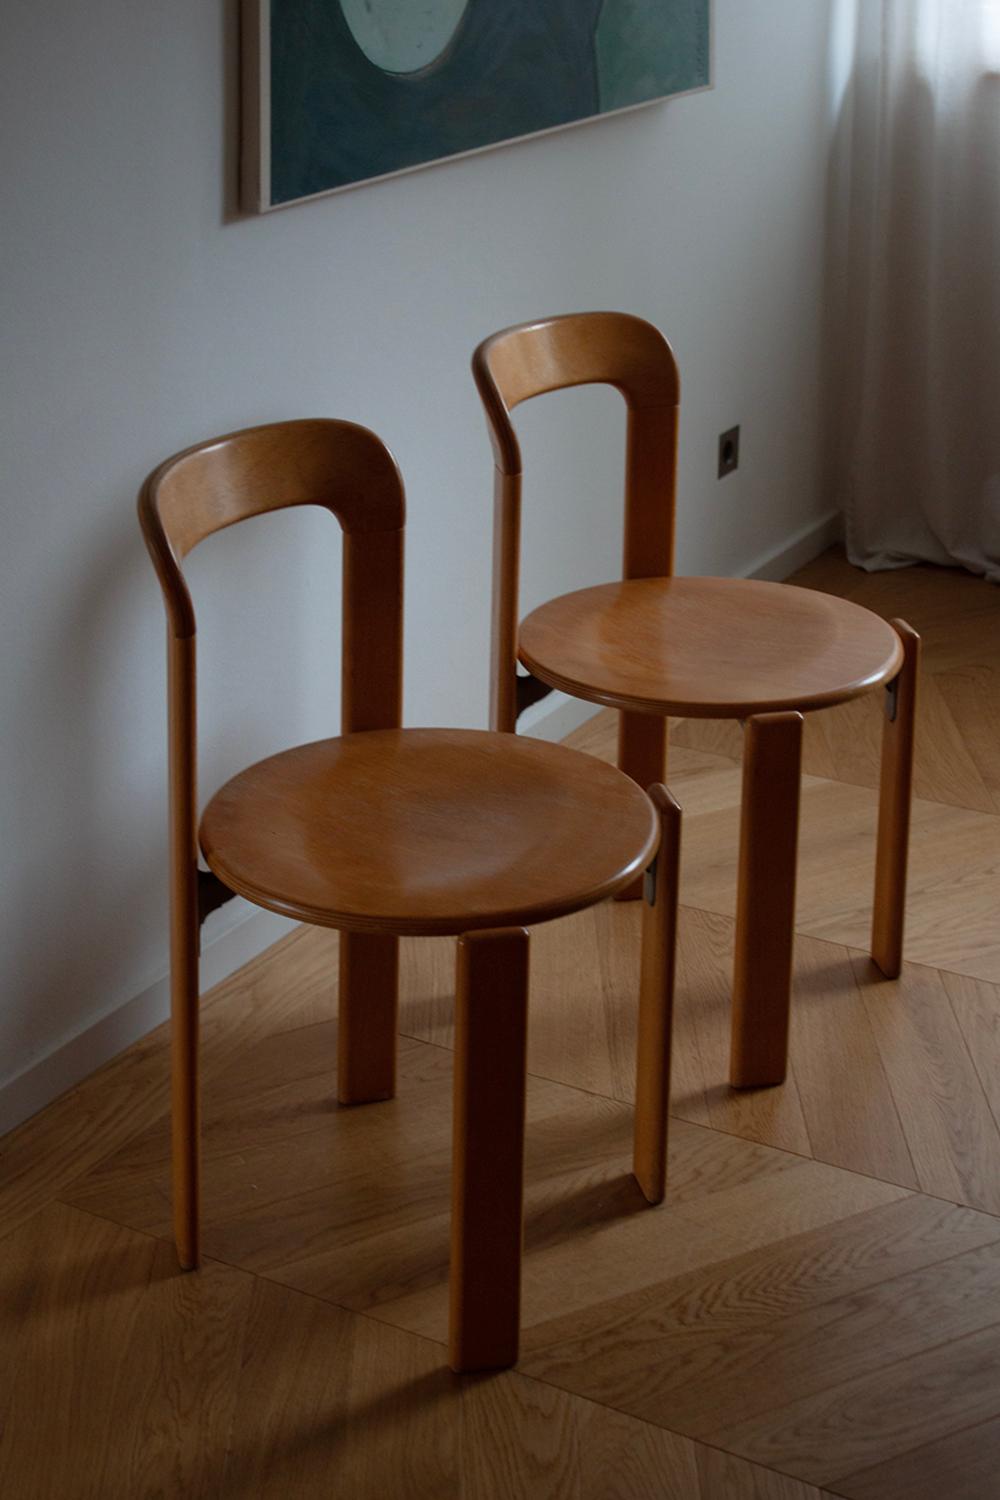 Machine-Made Two Bruno Rey Chairs in Beech Wood circa 1970 by Dietiker with Original Cushion